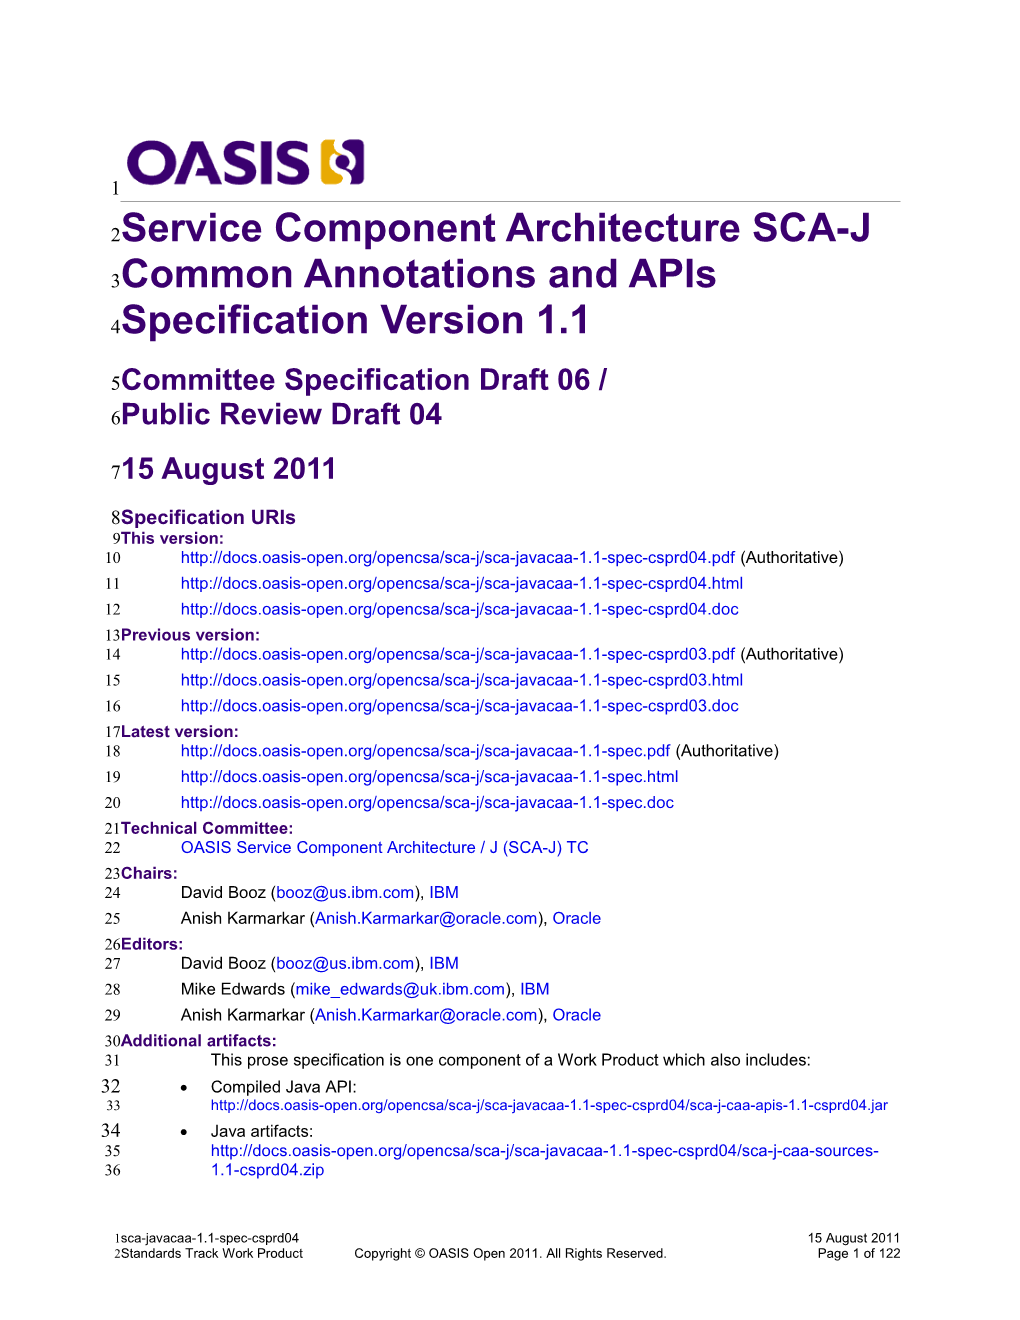 Service Component Architecture SCA-J Common Annotations and Apis Specification Version 1.1